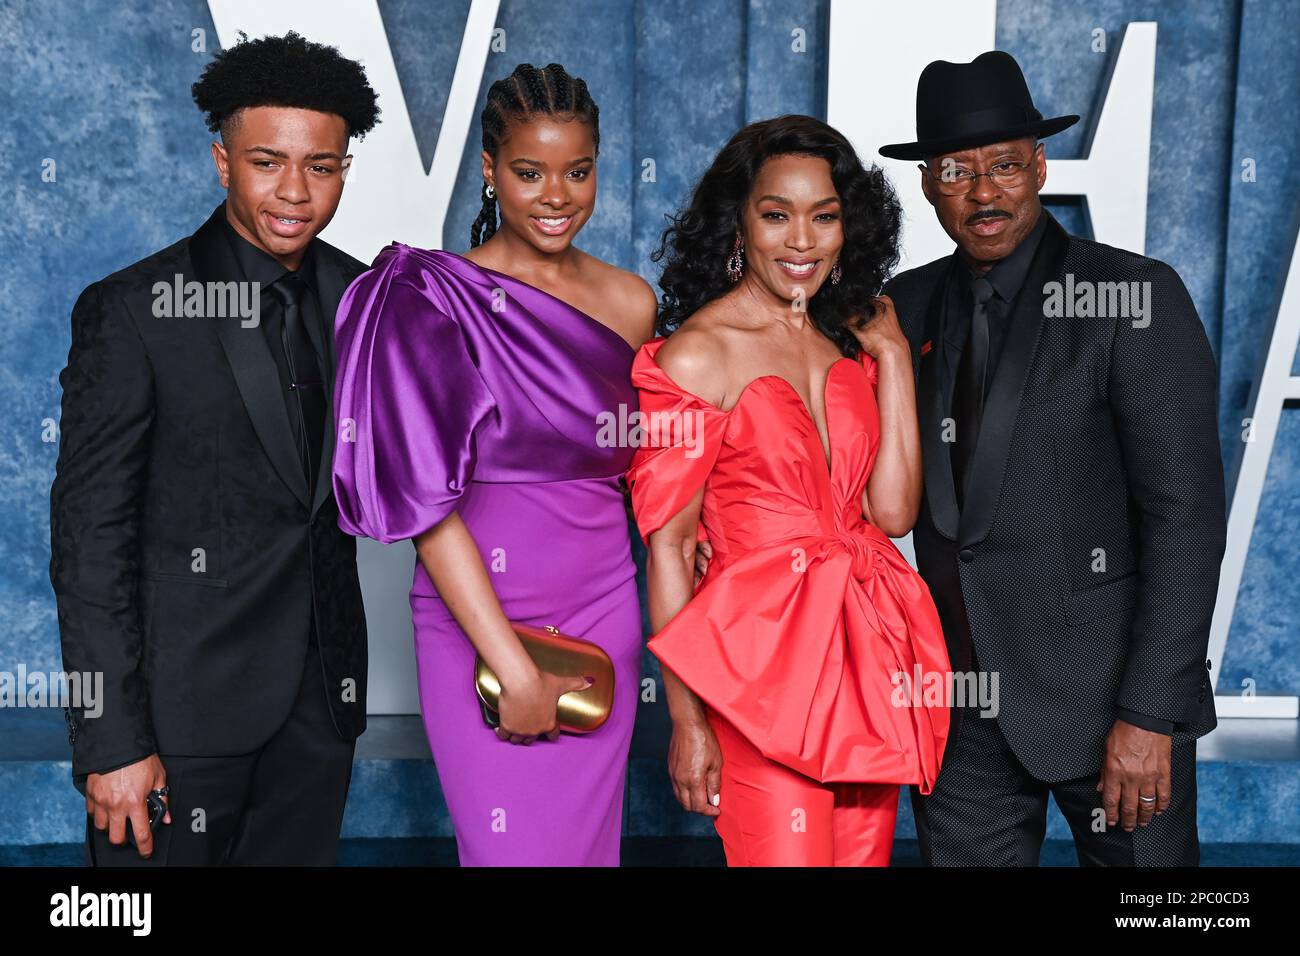 Los Angeles, USA. 13th Mar, 2023 Slater Josiah Vance, Bronwyn Golden Vance, Angela Bassett and Courtney B. Vance arriving at the Vanity Fair Oscar Party 2023, Wallis Annenberg Center for the Performing Arts, Los Angeles. Credit: Doug Peters/EMPICS/Alamy Live News Stock Photo